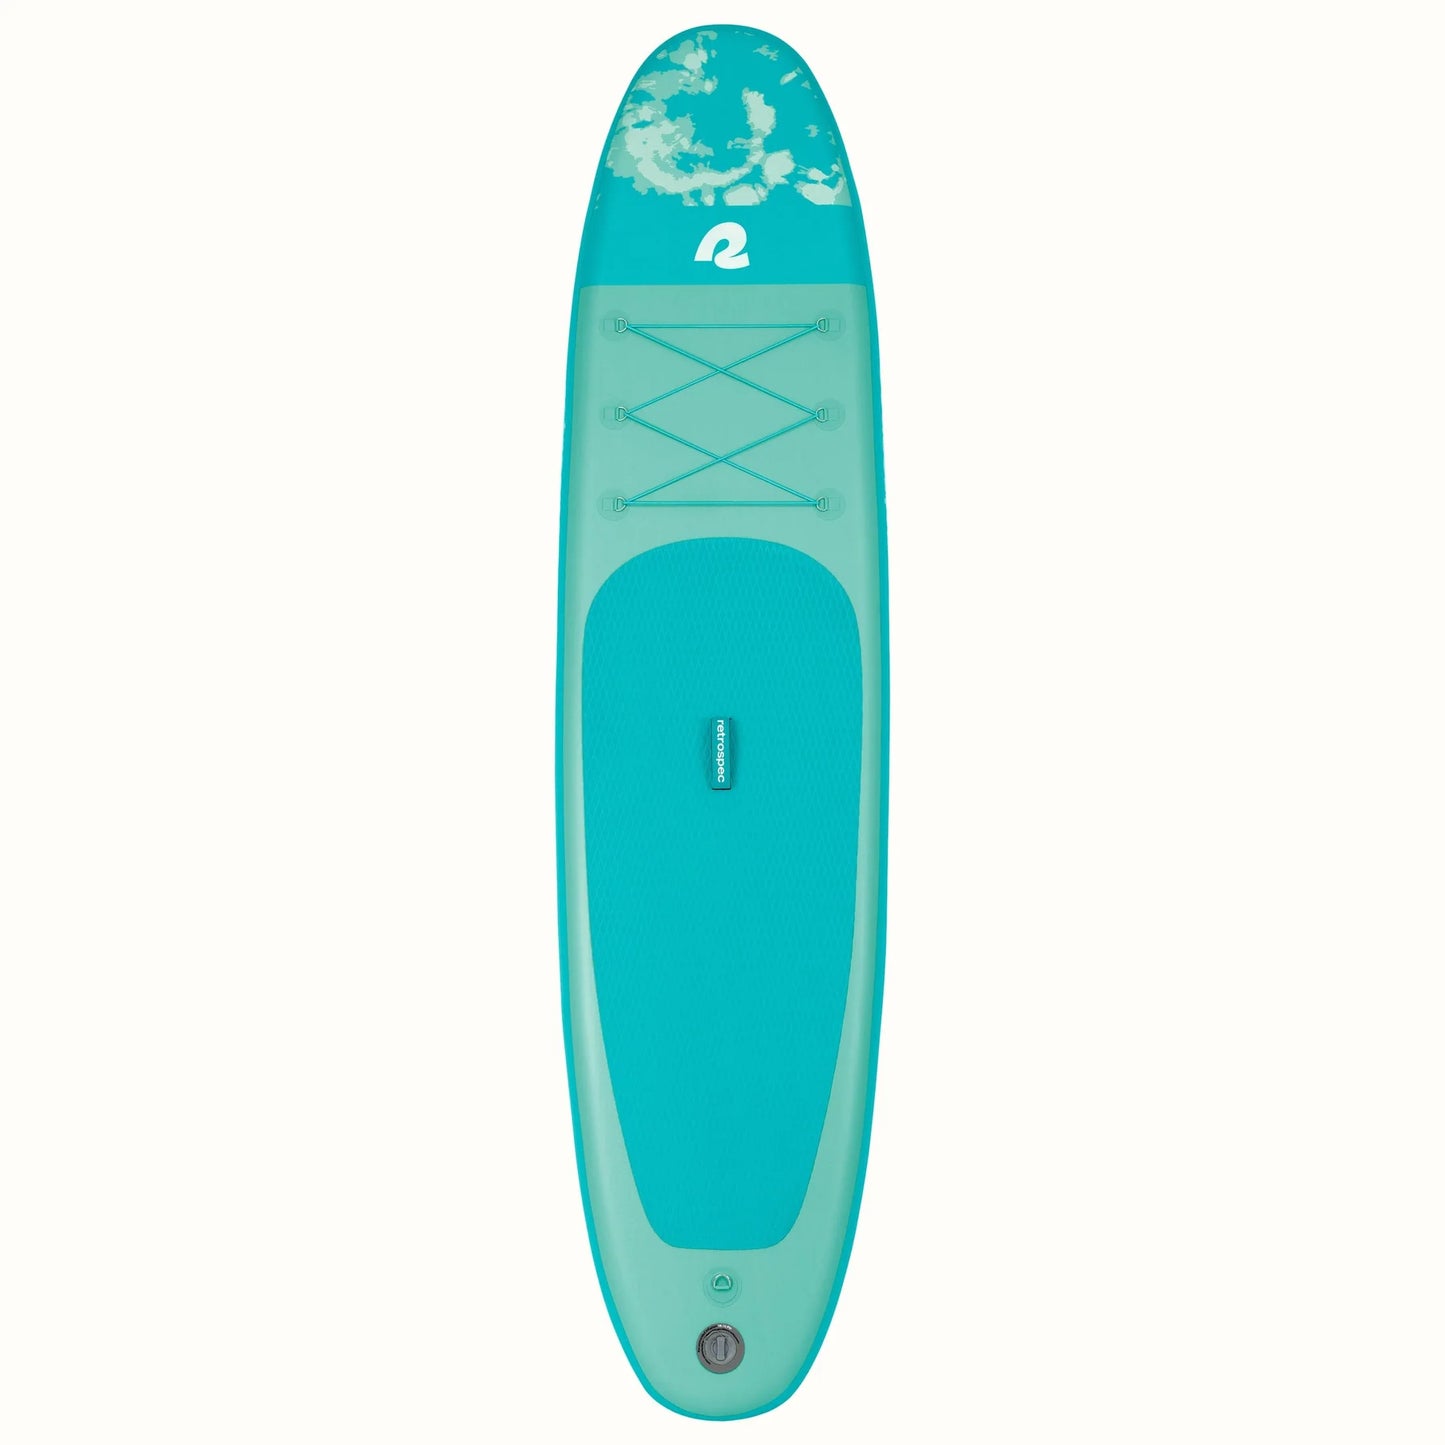 Retrospec Inflatable Standup Paddleboard iSUP Weekender Plus 10' Inflatable Stand Up Paddle Board (Legacy) Seafoam TieDye Color Condition New Max 300 LB Stand Up Paddle Board Inflatable Boating